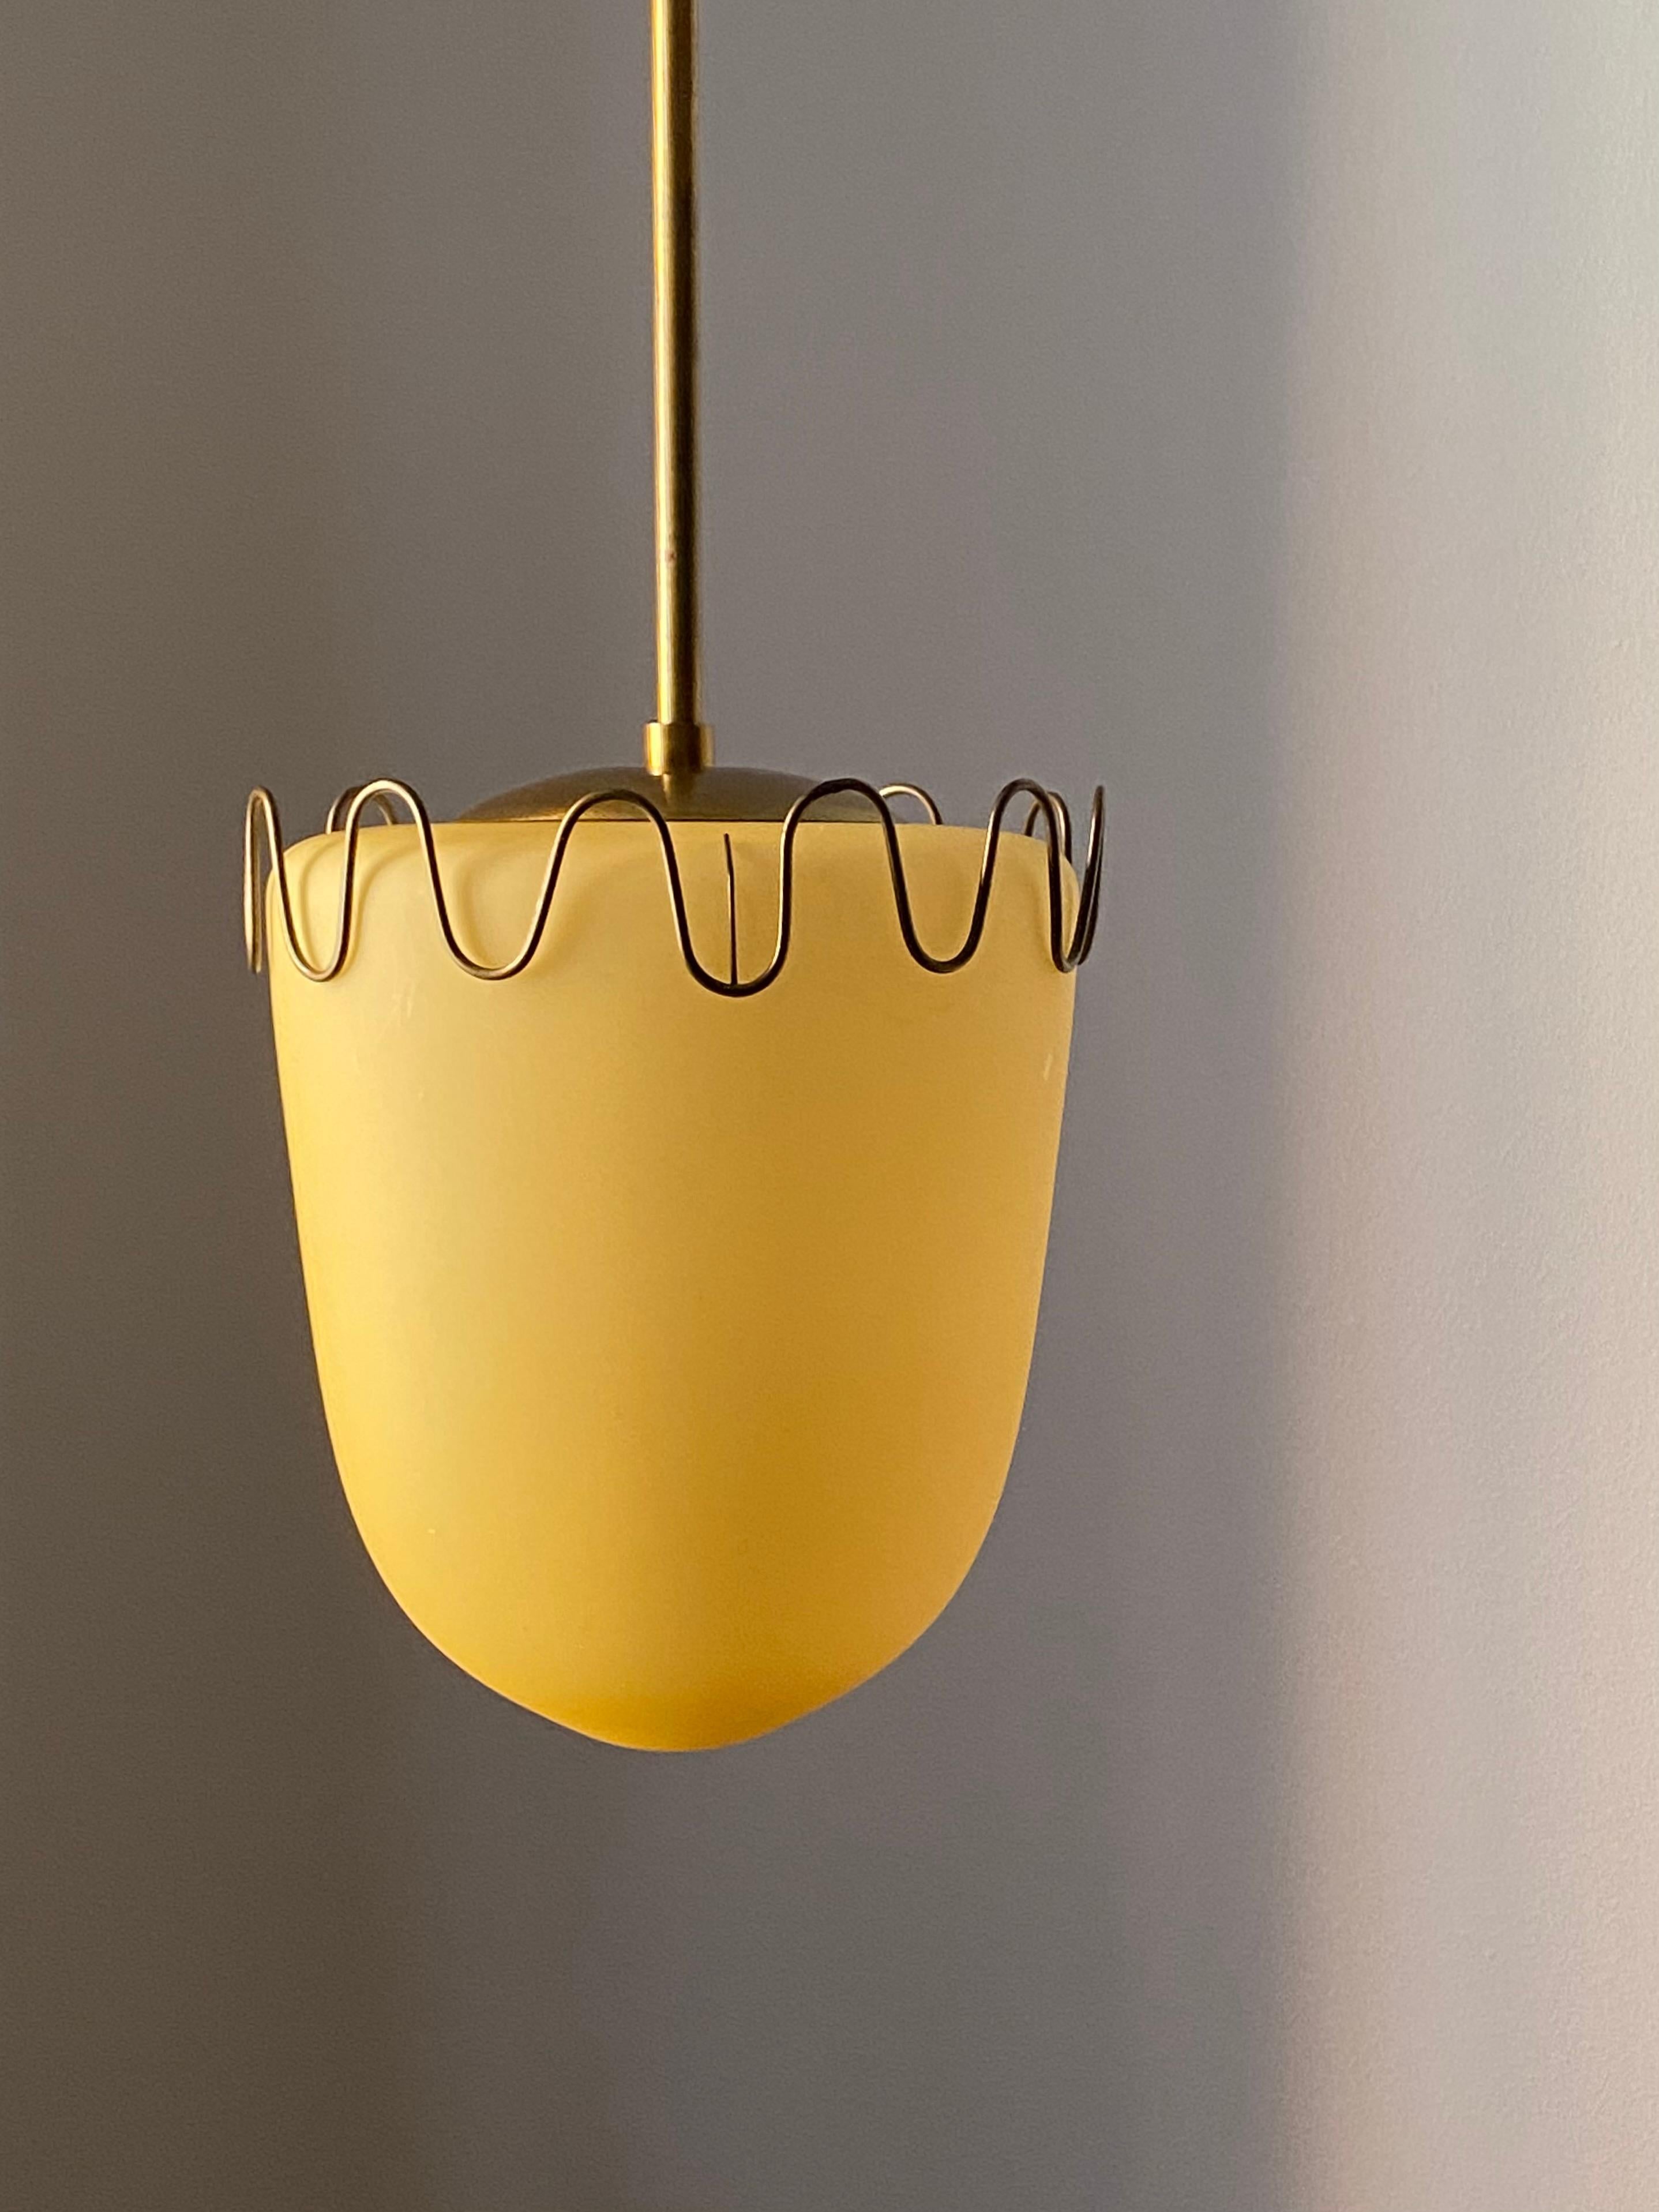 A small ceiling light / pendant light. Designed and produced in Sweden, 1940s. Features simple organic ornamentation. 

Other designers of the period include Paolo Buffa, Josef Frank, Jean Royère, Paavo Tynell, Lisa Johansson Pape.